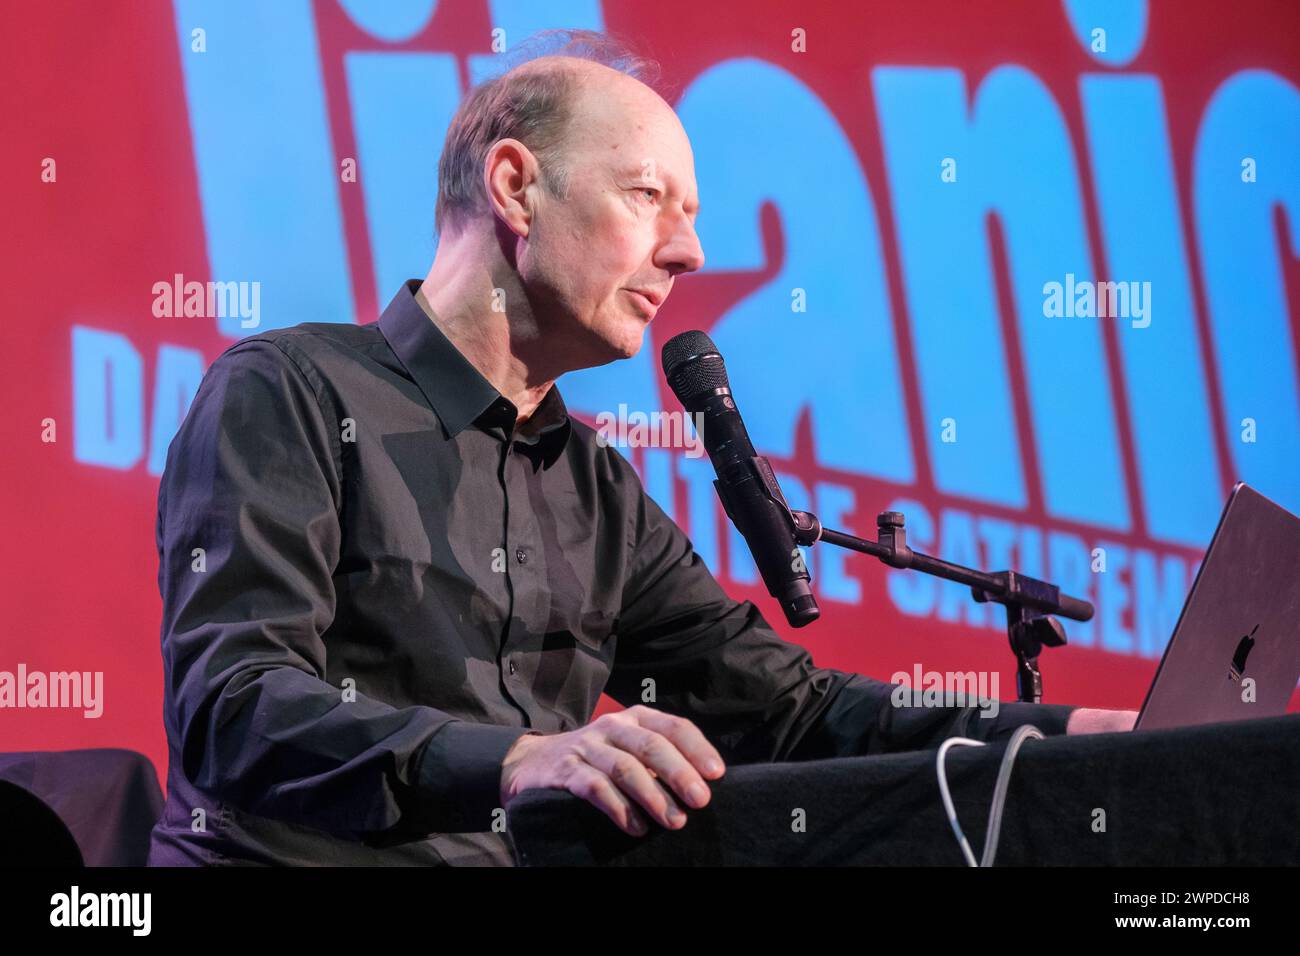 Martin Sonneborn at an appearance during the Cologne literature festival LIT.COLOGNE at the Volksbühne am Rudolfplatz. Stock Photo